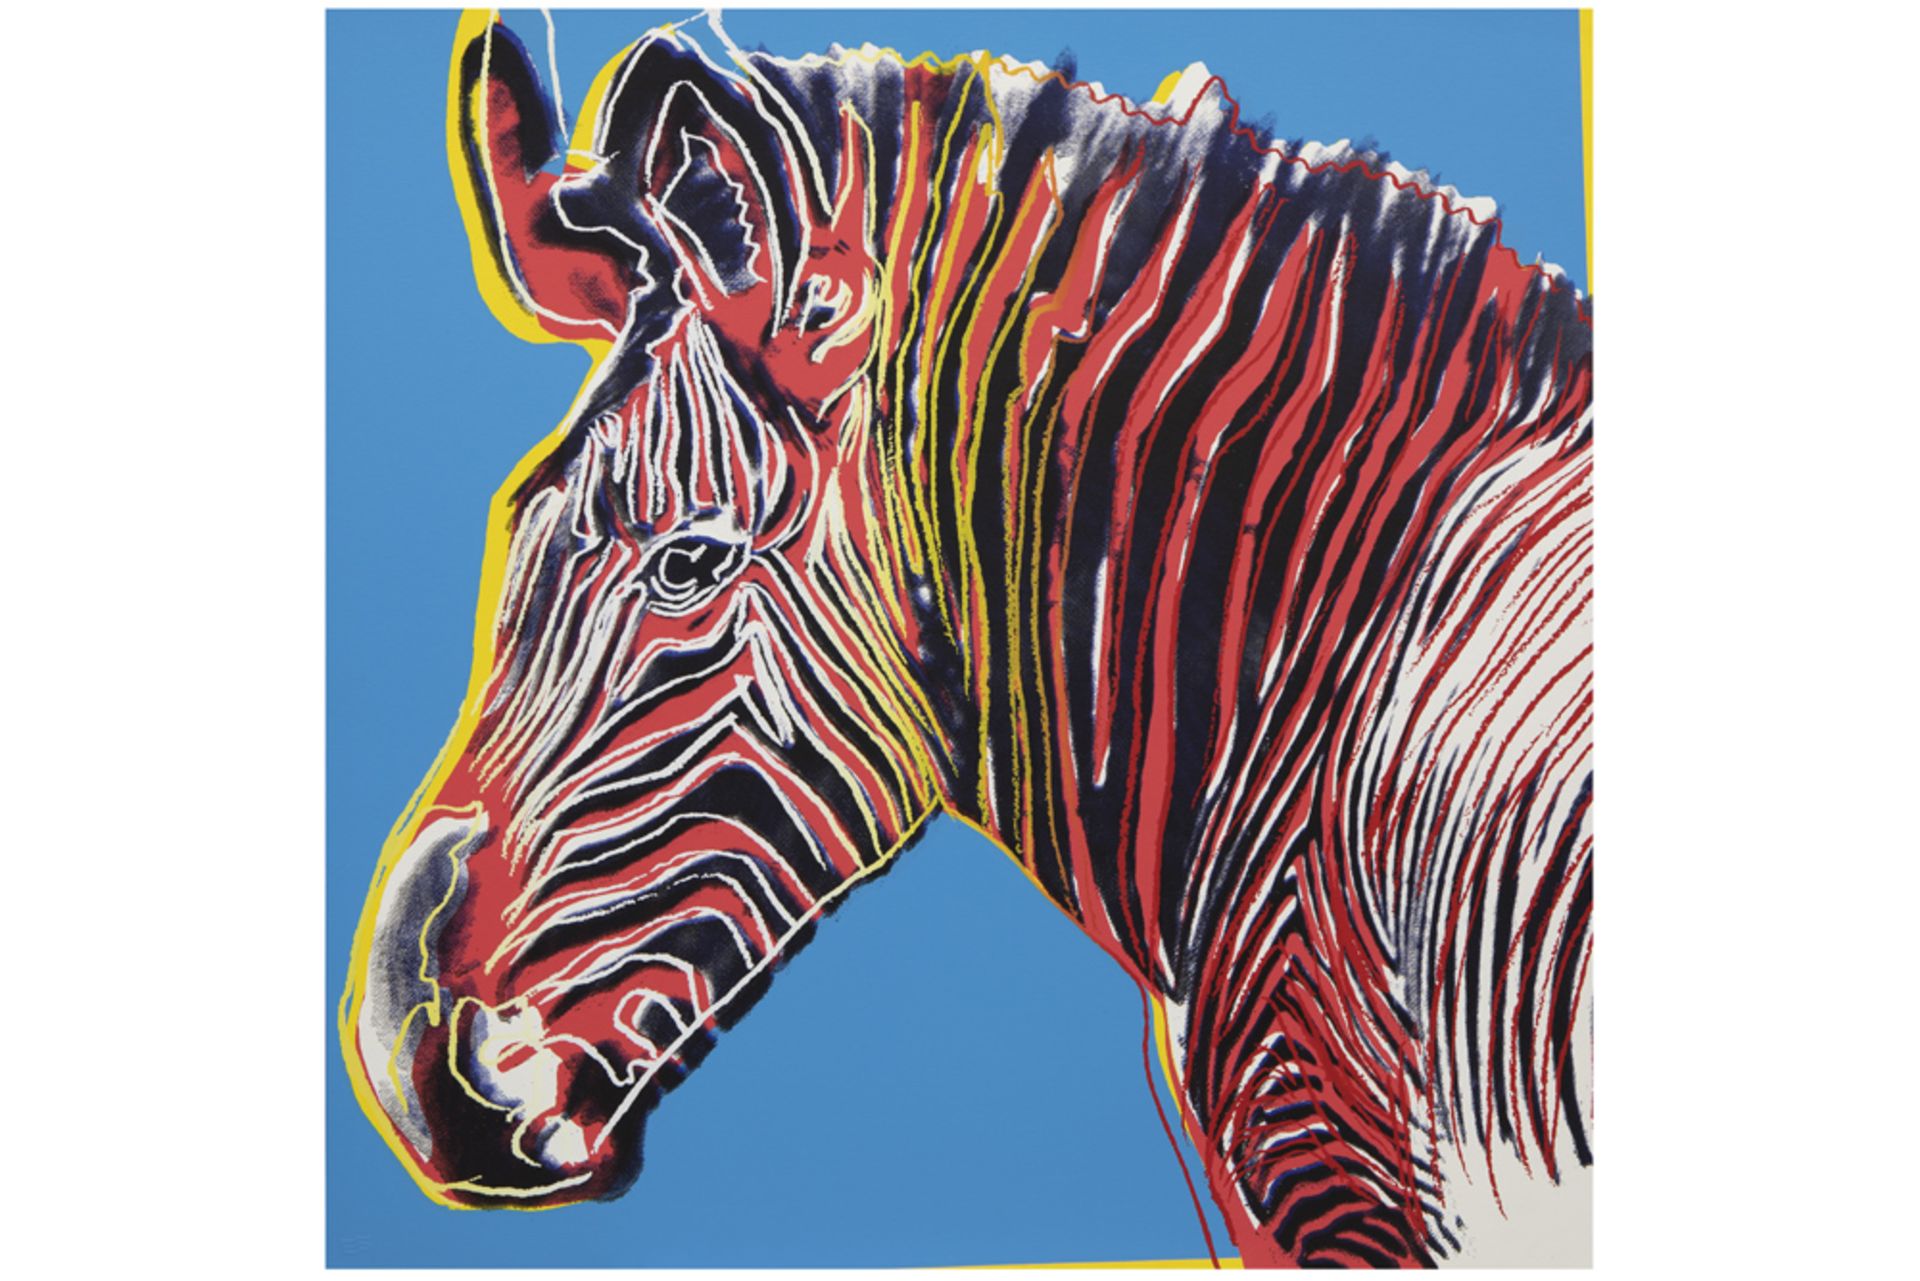 Andy Warhol "Zebra" silkscreen from the series "Endangered Species" with the blind stamp of Warhol's